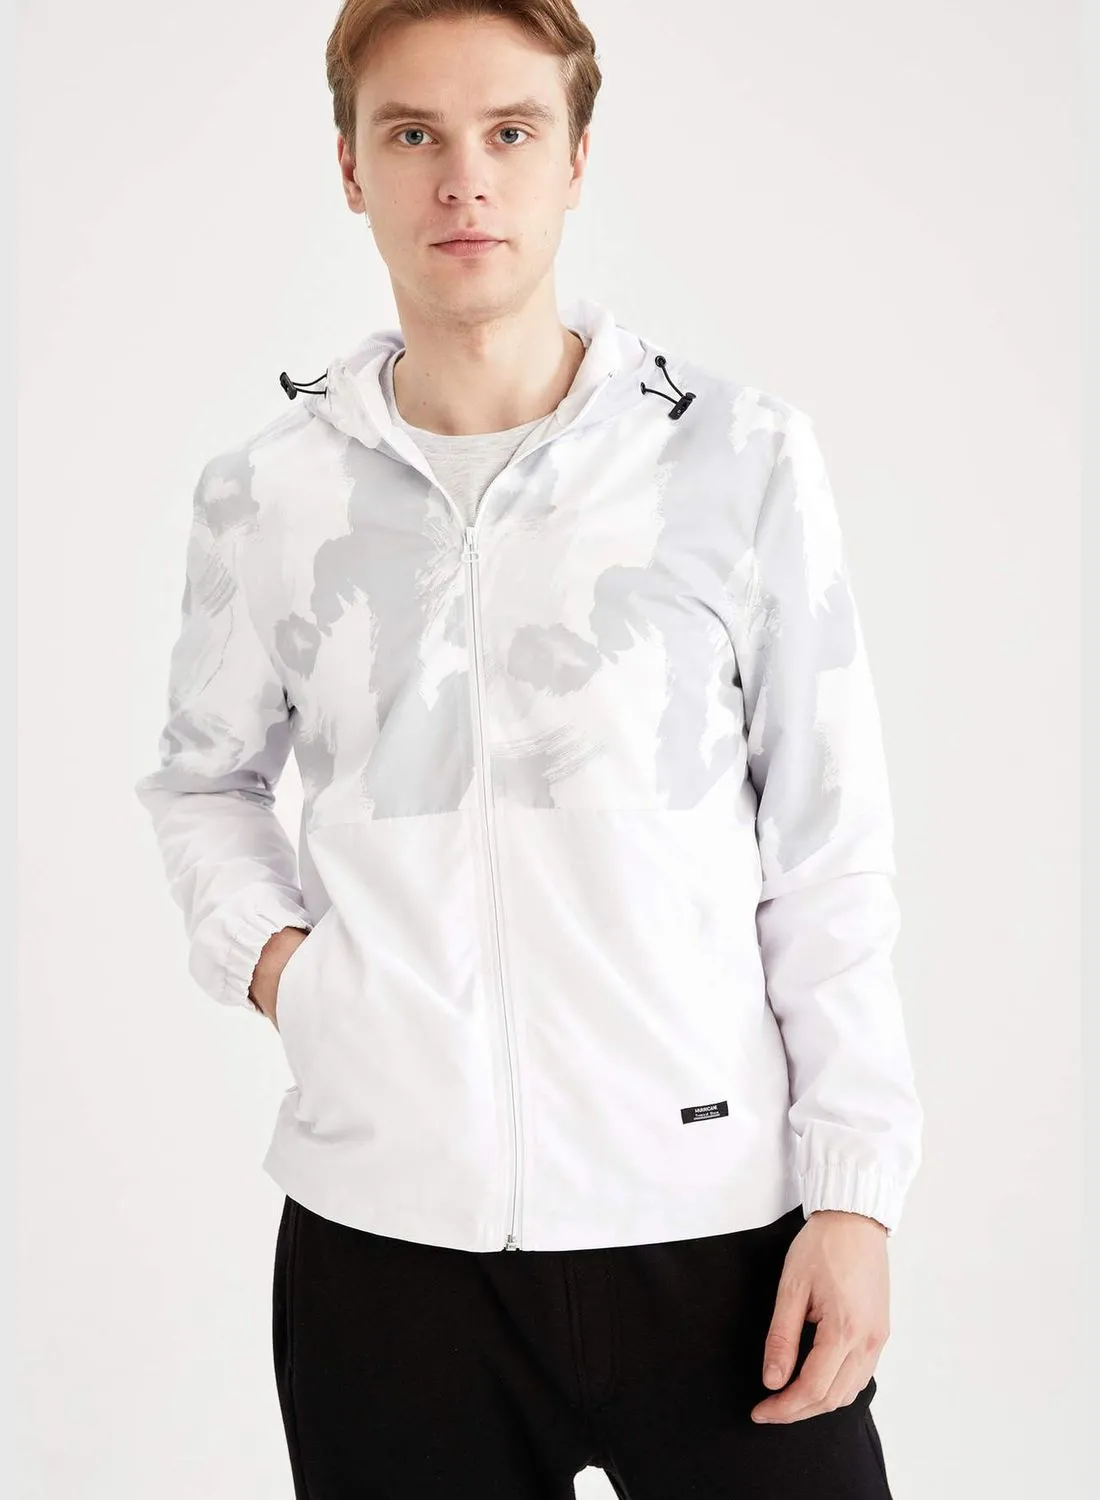 DeFacto Slim Fit Patterned Hooded Thin Zip-Up Jacket